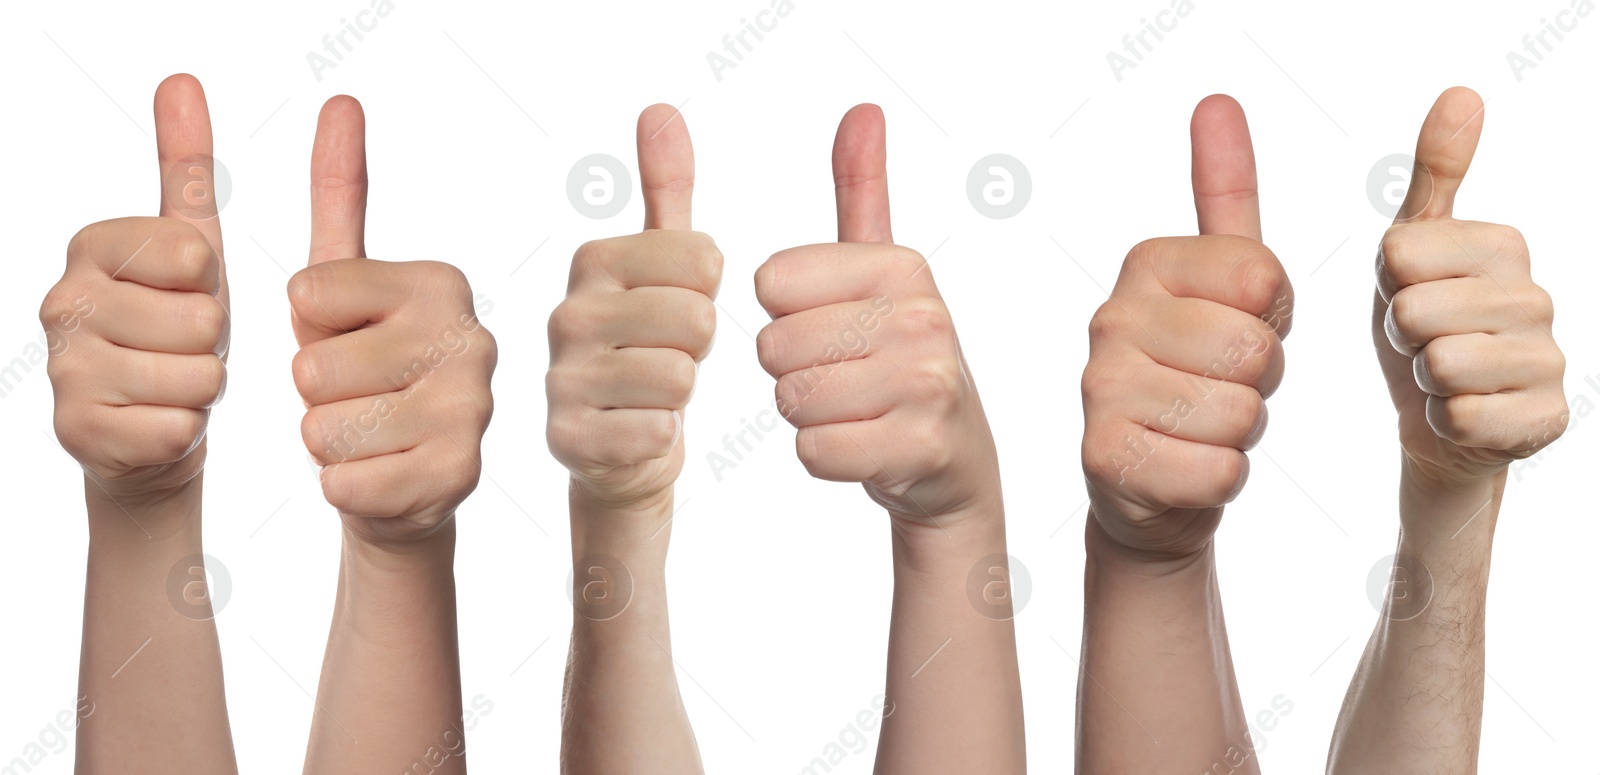 Image of Collage with photos of people showing thumbs up gestures on white background. Banner design